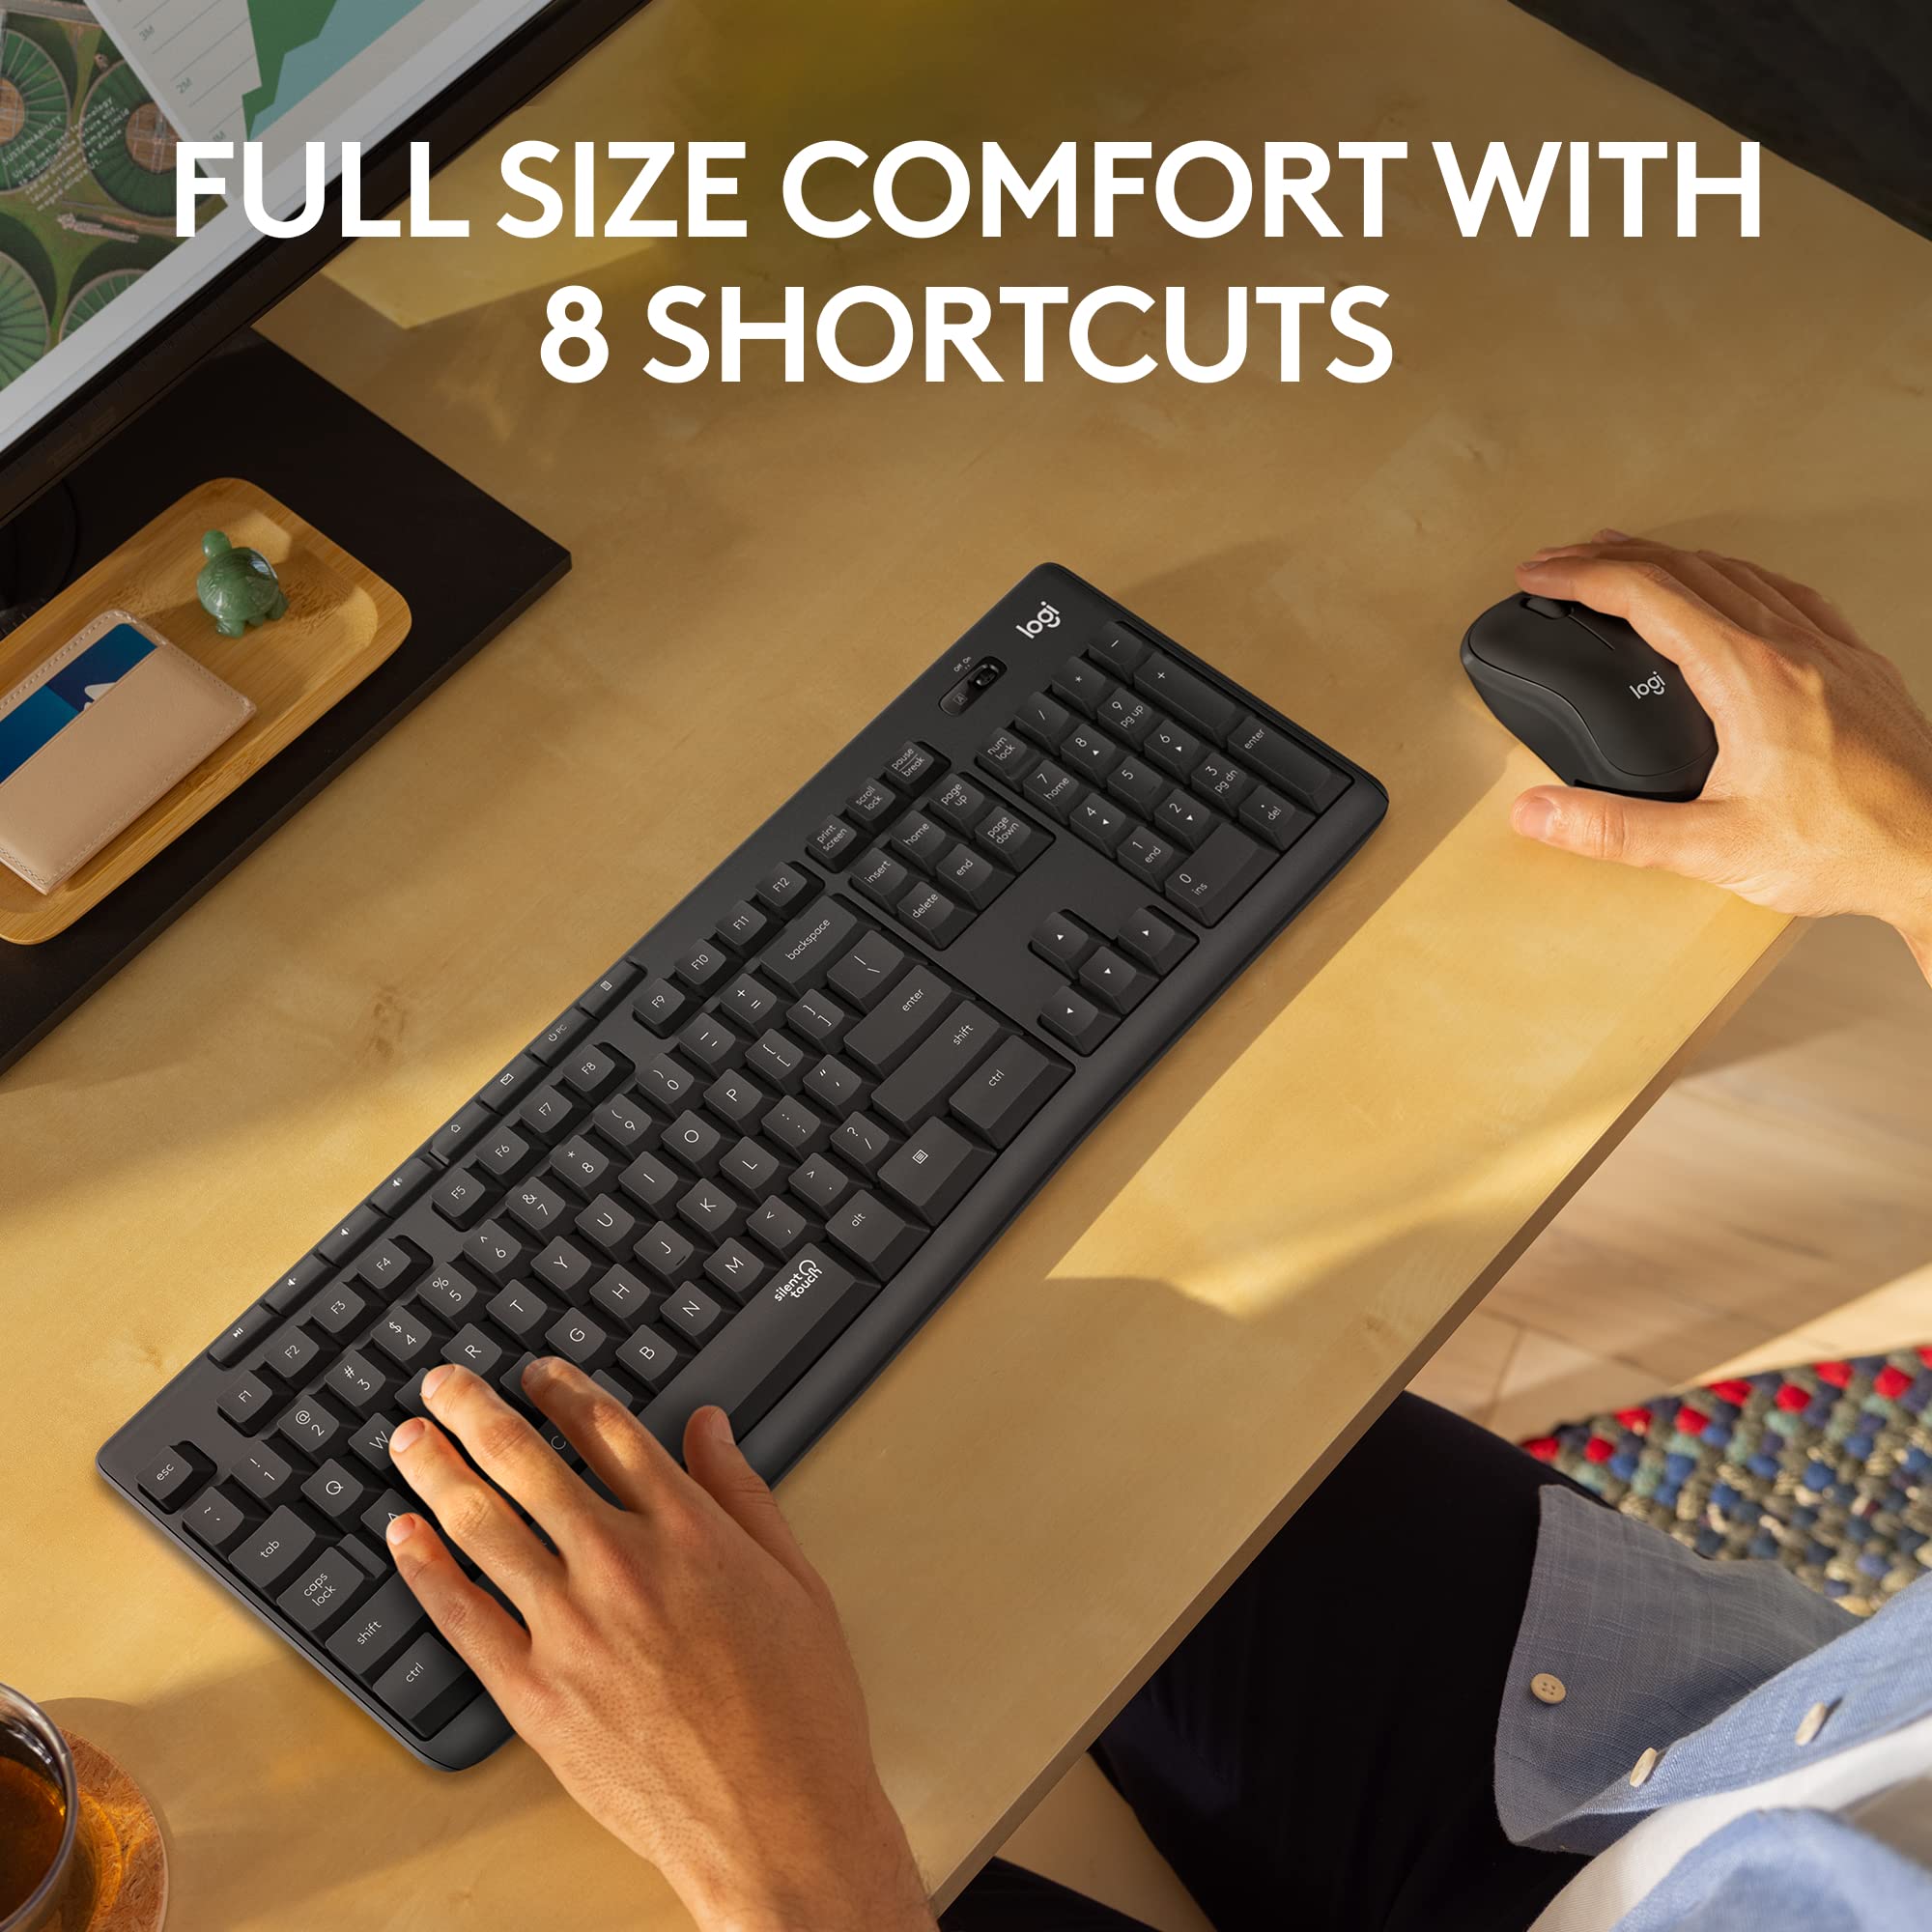 Logitech MK295 Wireless Mouse & Keyboard Combo with SilentTouch Technology, Full Numpad, Advanced Optical Tracking, Lag-Free Wireless, 90% Less Noise - Graphite